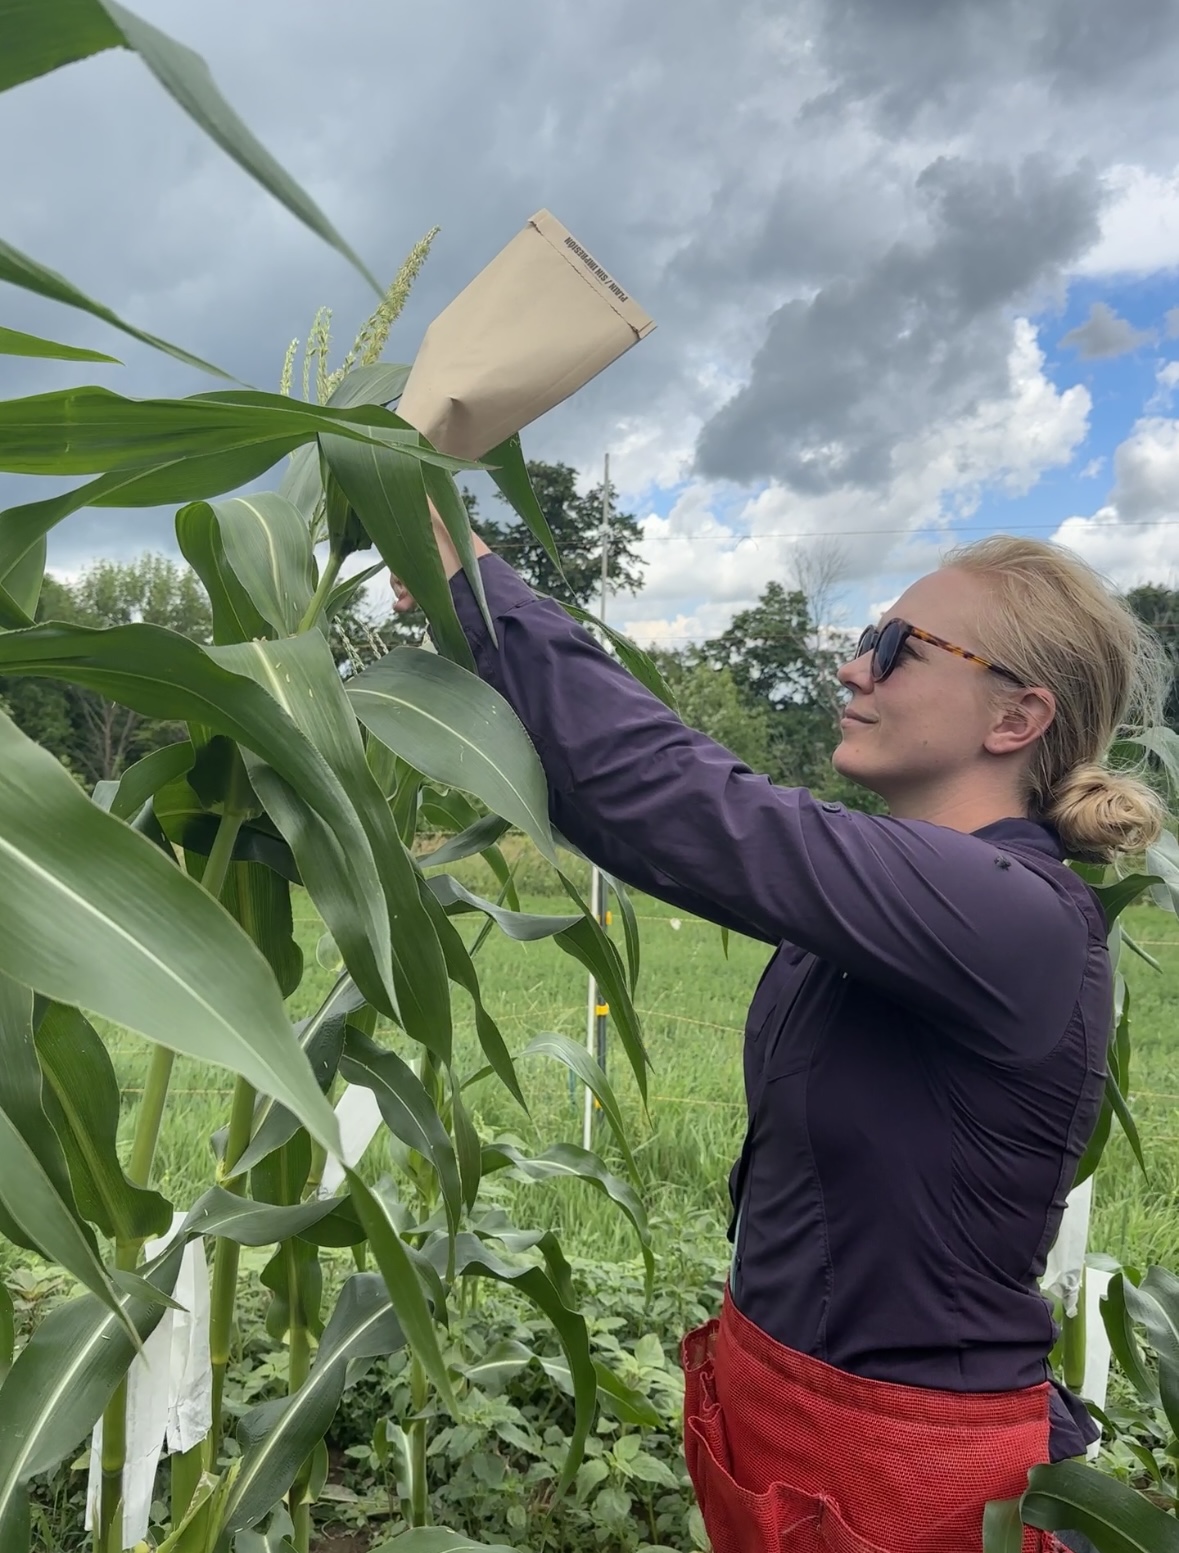 A blonde woman wearing sunglasses and a long-sleeved top placing a paper bag over corn stalk for hand pollinating.